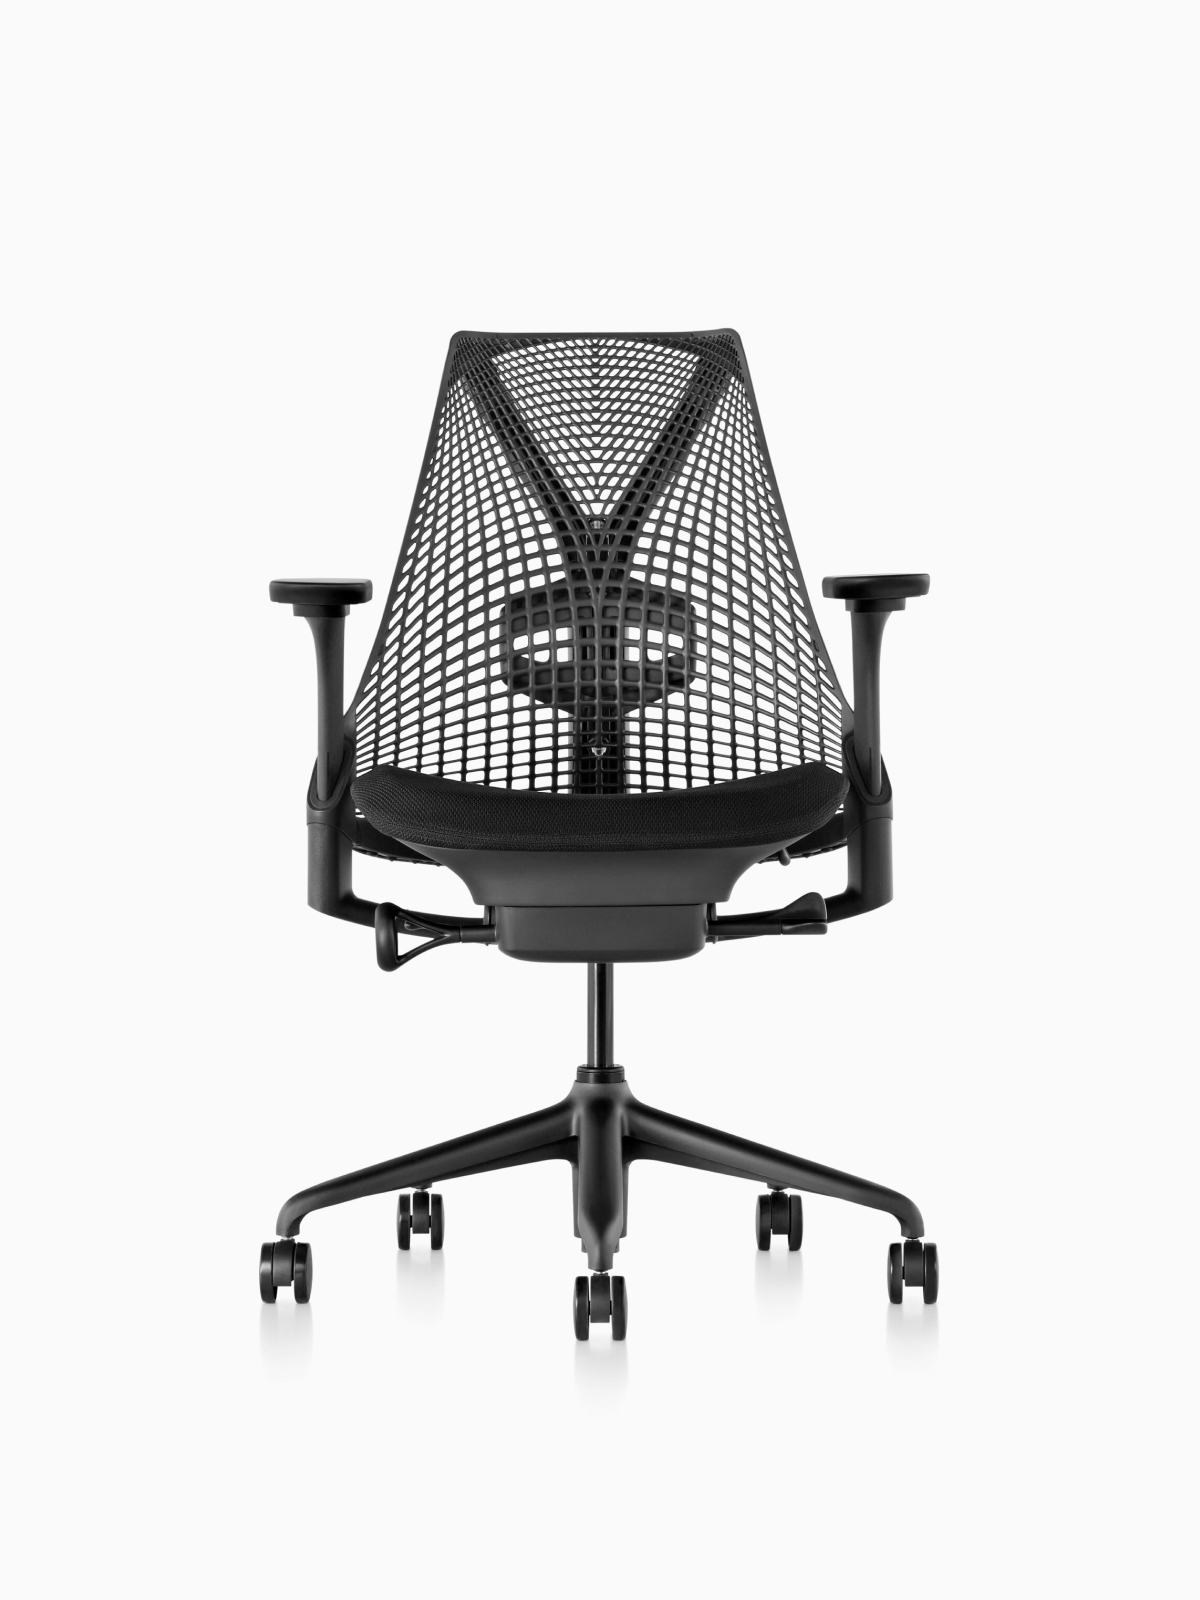 Black Sayl office chair with suspension back viewed from the front